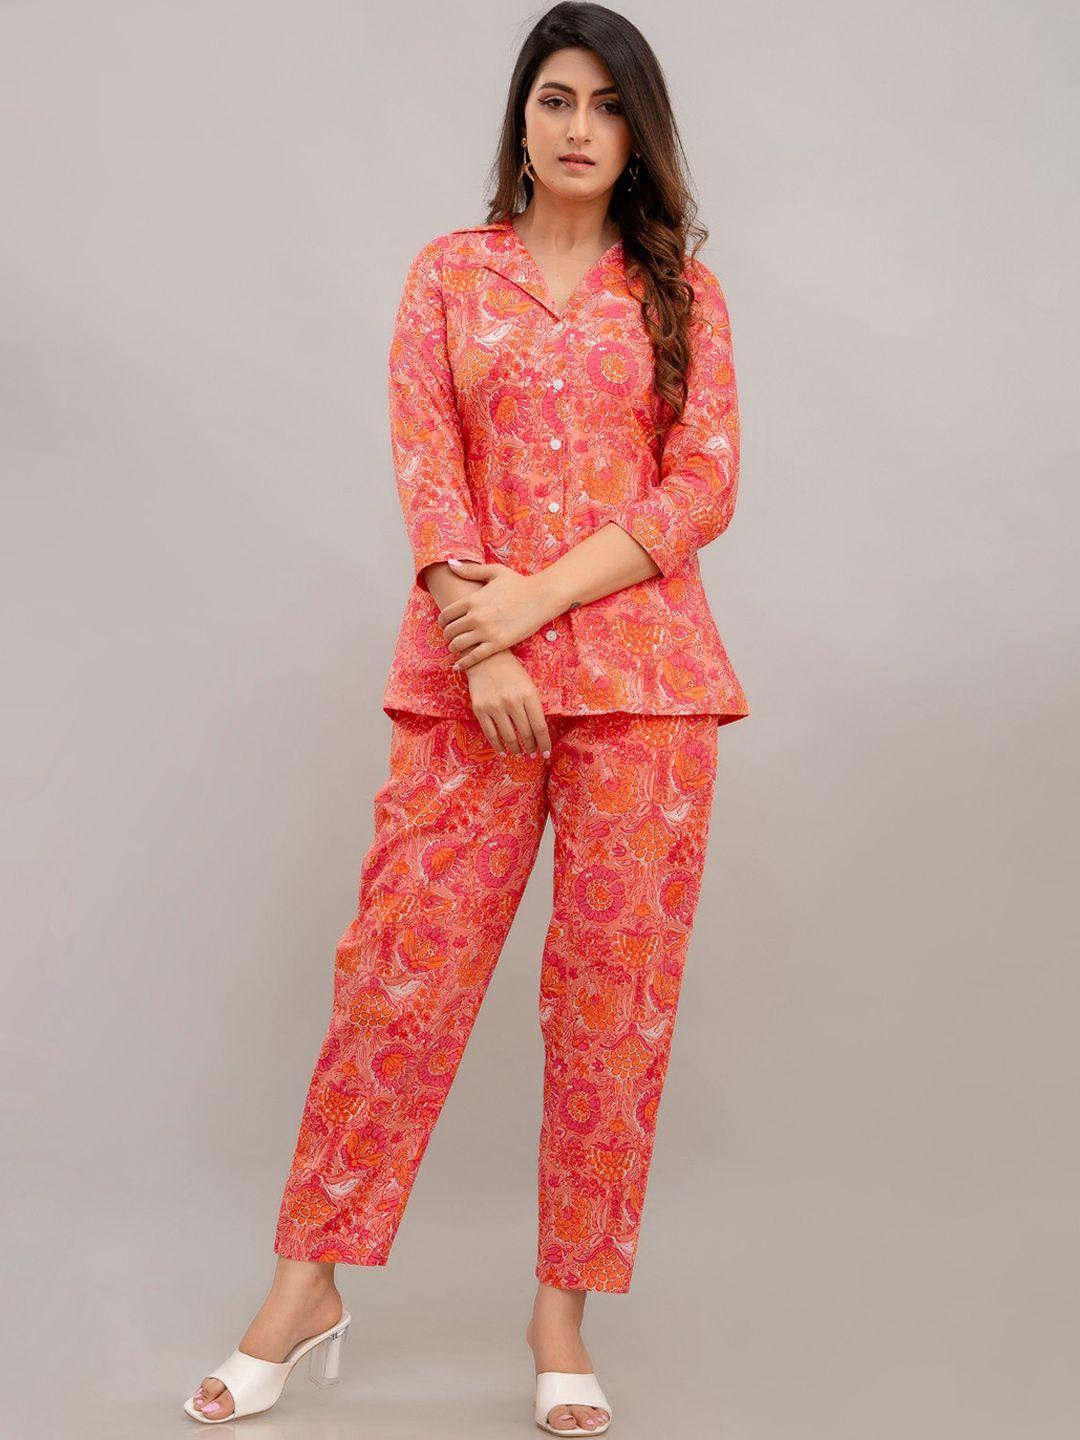 frionkandy printed pure cotton shirt & trousers